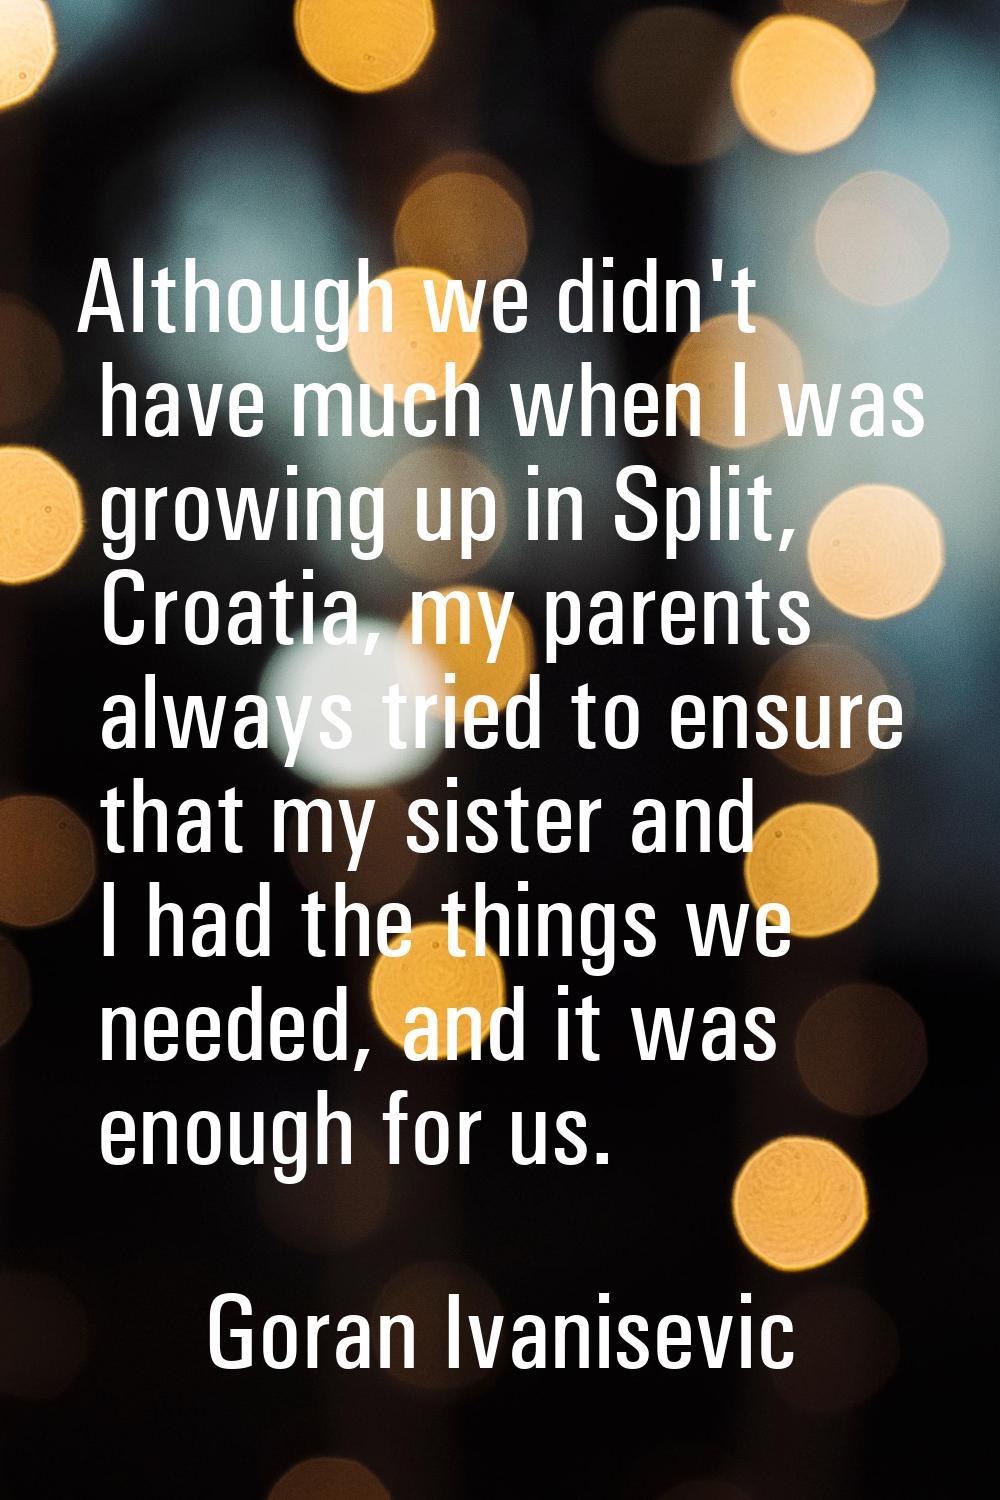 Although we didn't have much when I was growing up in Split, Croatia, my parents always tried to en